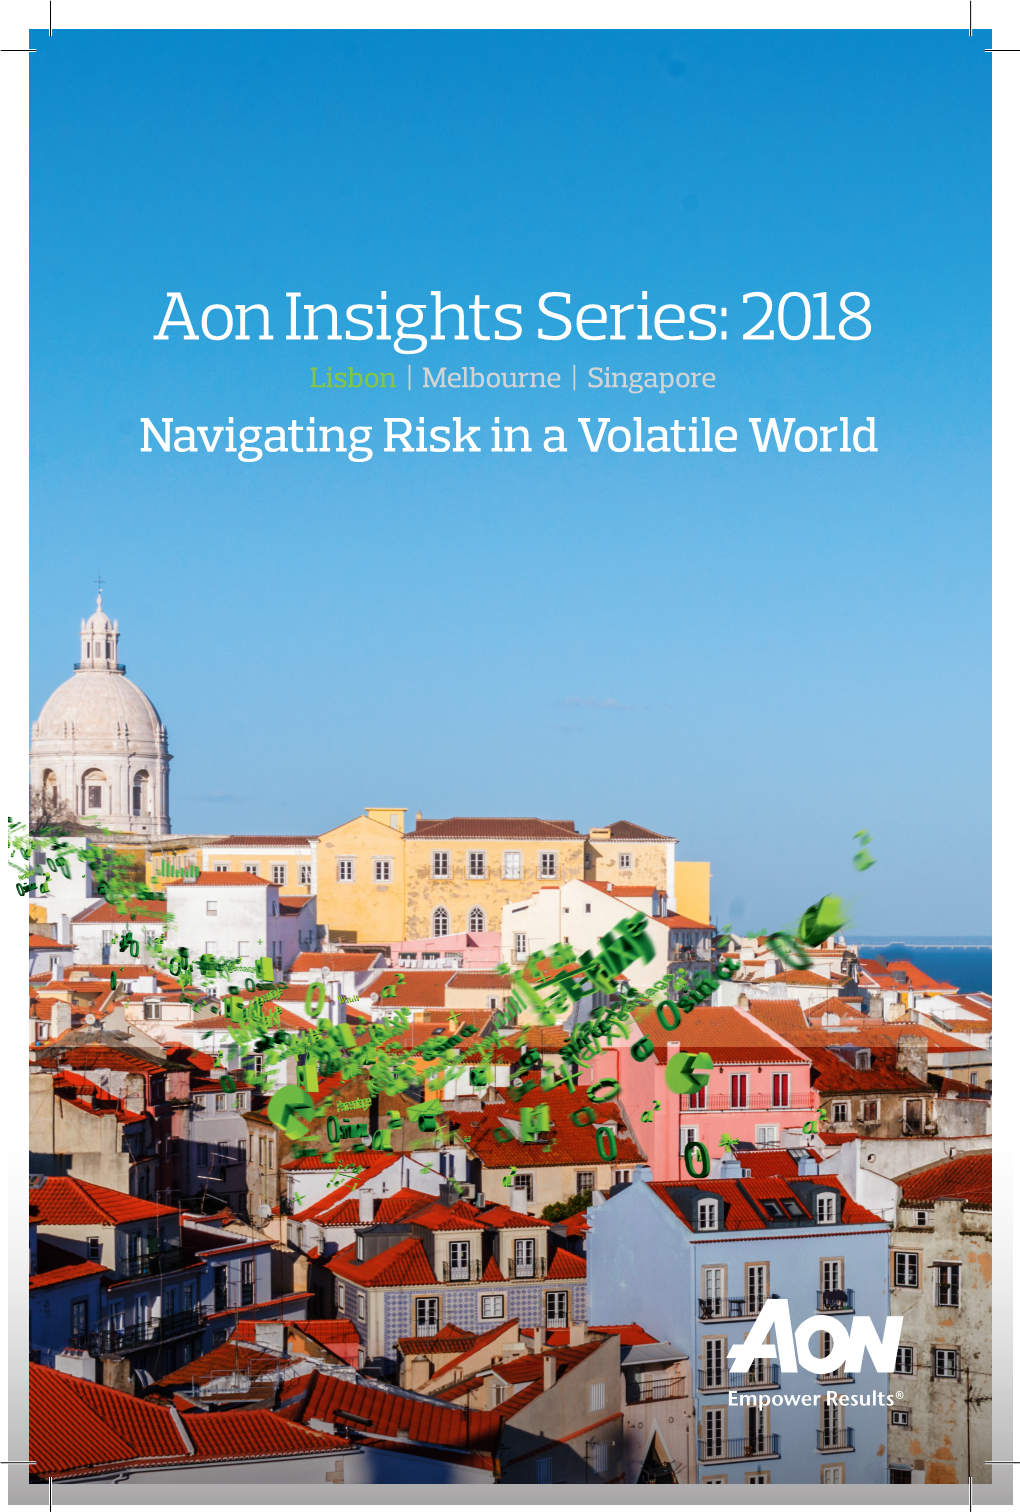 Aon Insights Series: 2018 Lisbon | Melbourne | Singapore Navigating Risk in a Volatile World